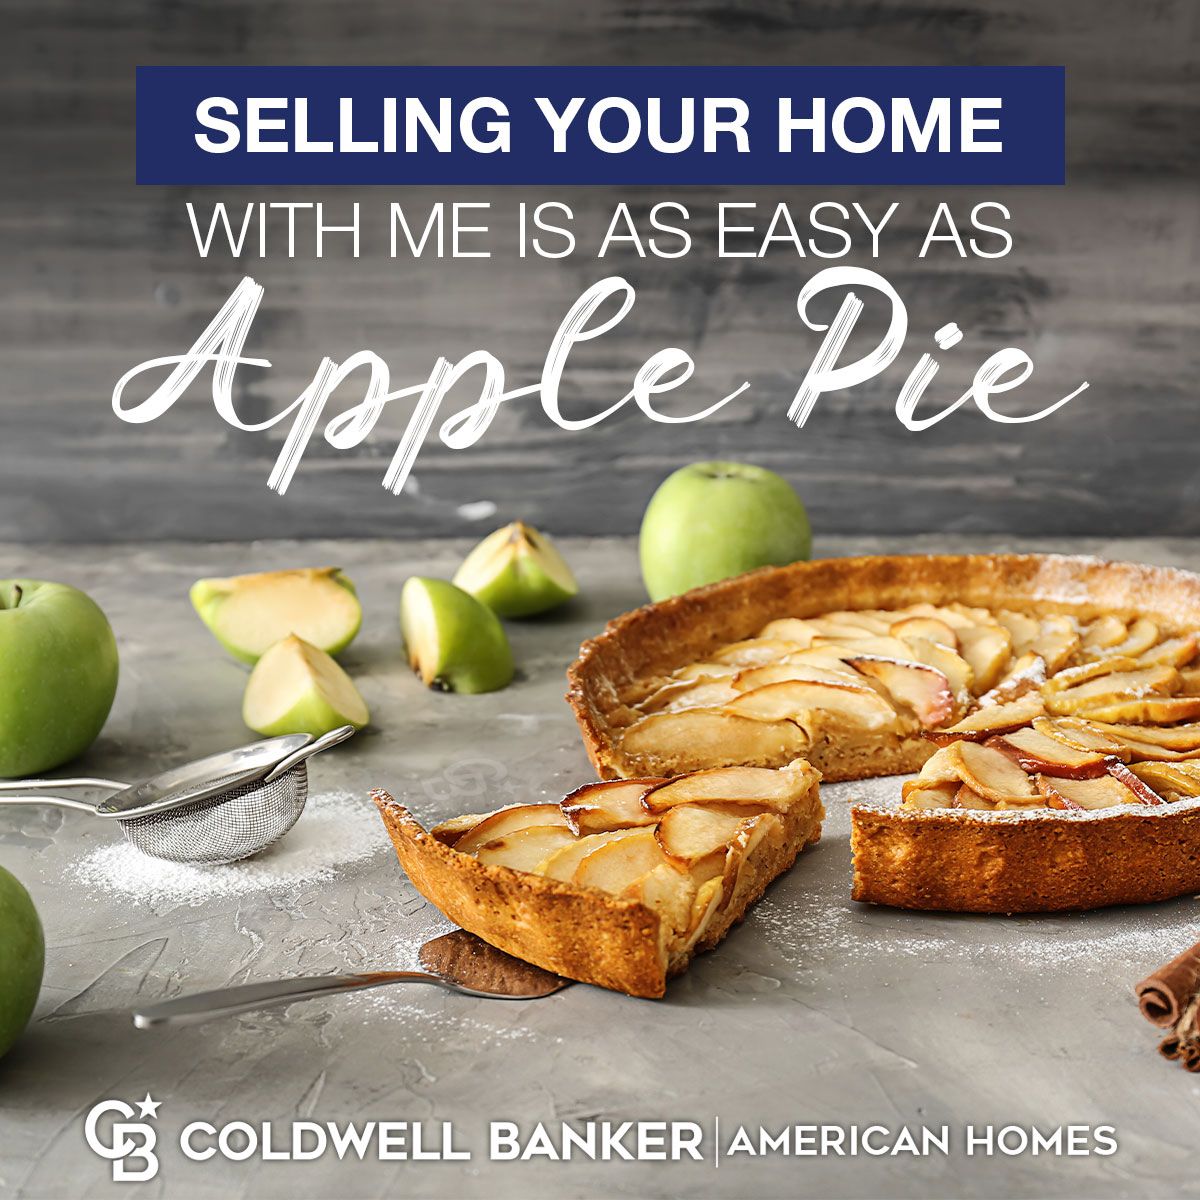 We know how overwhelming it can be. Sell smarter and faster. Leave It To Us!

#CBAmericanHomes #cbamhomes #coldwellbanker #RealEstate #ThinkingOfSelling #WeKnowRealEstate #YourRealtor